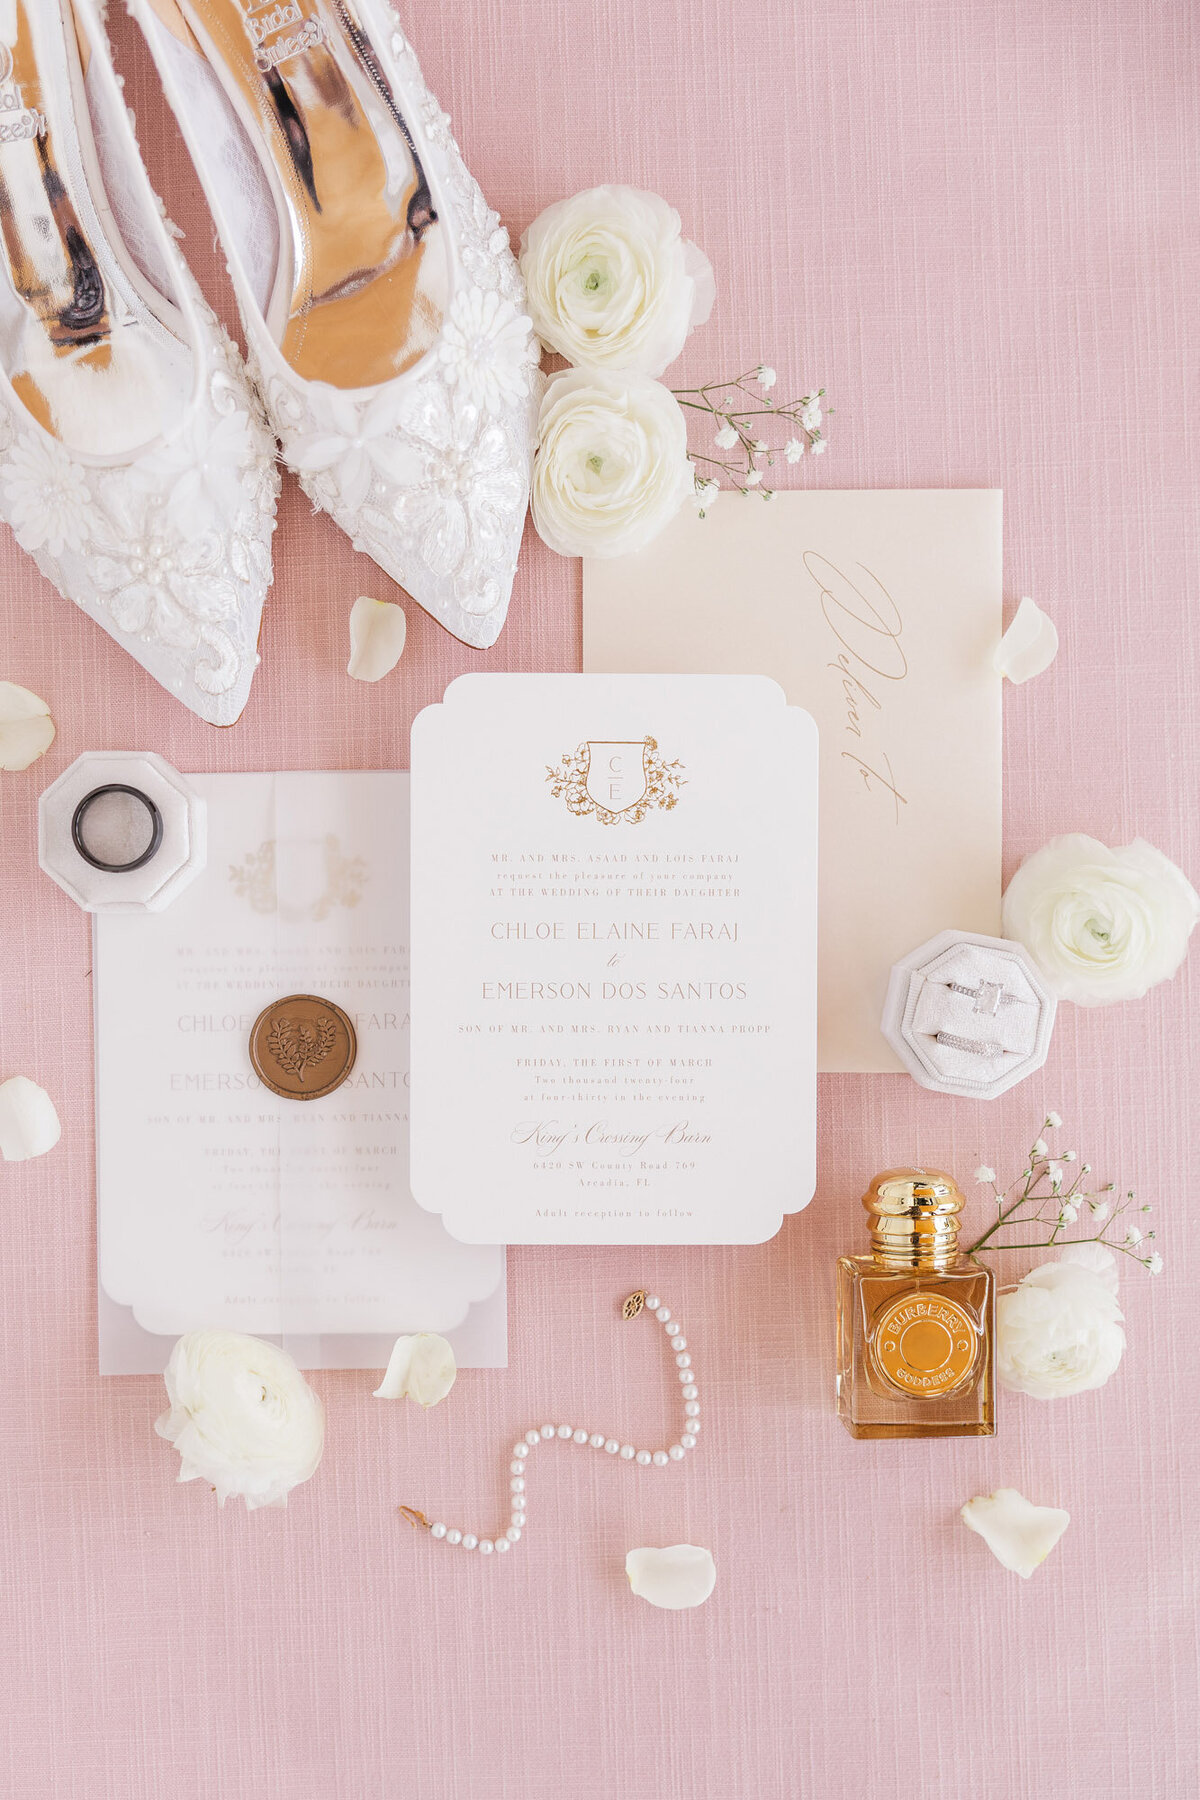 invitations and other wedding details